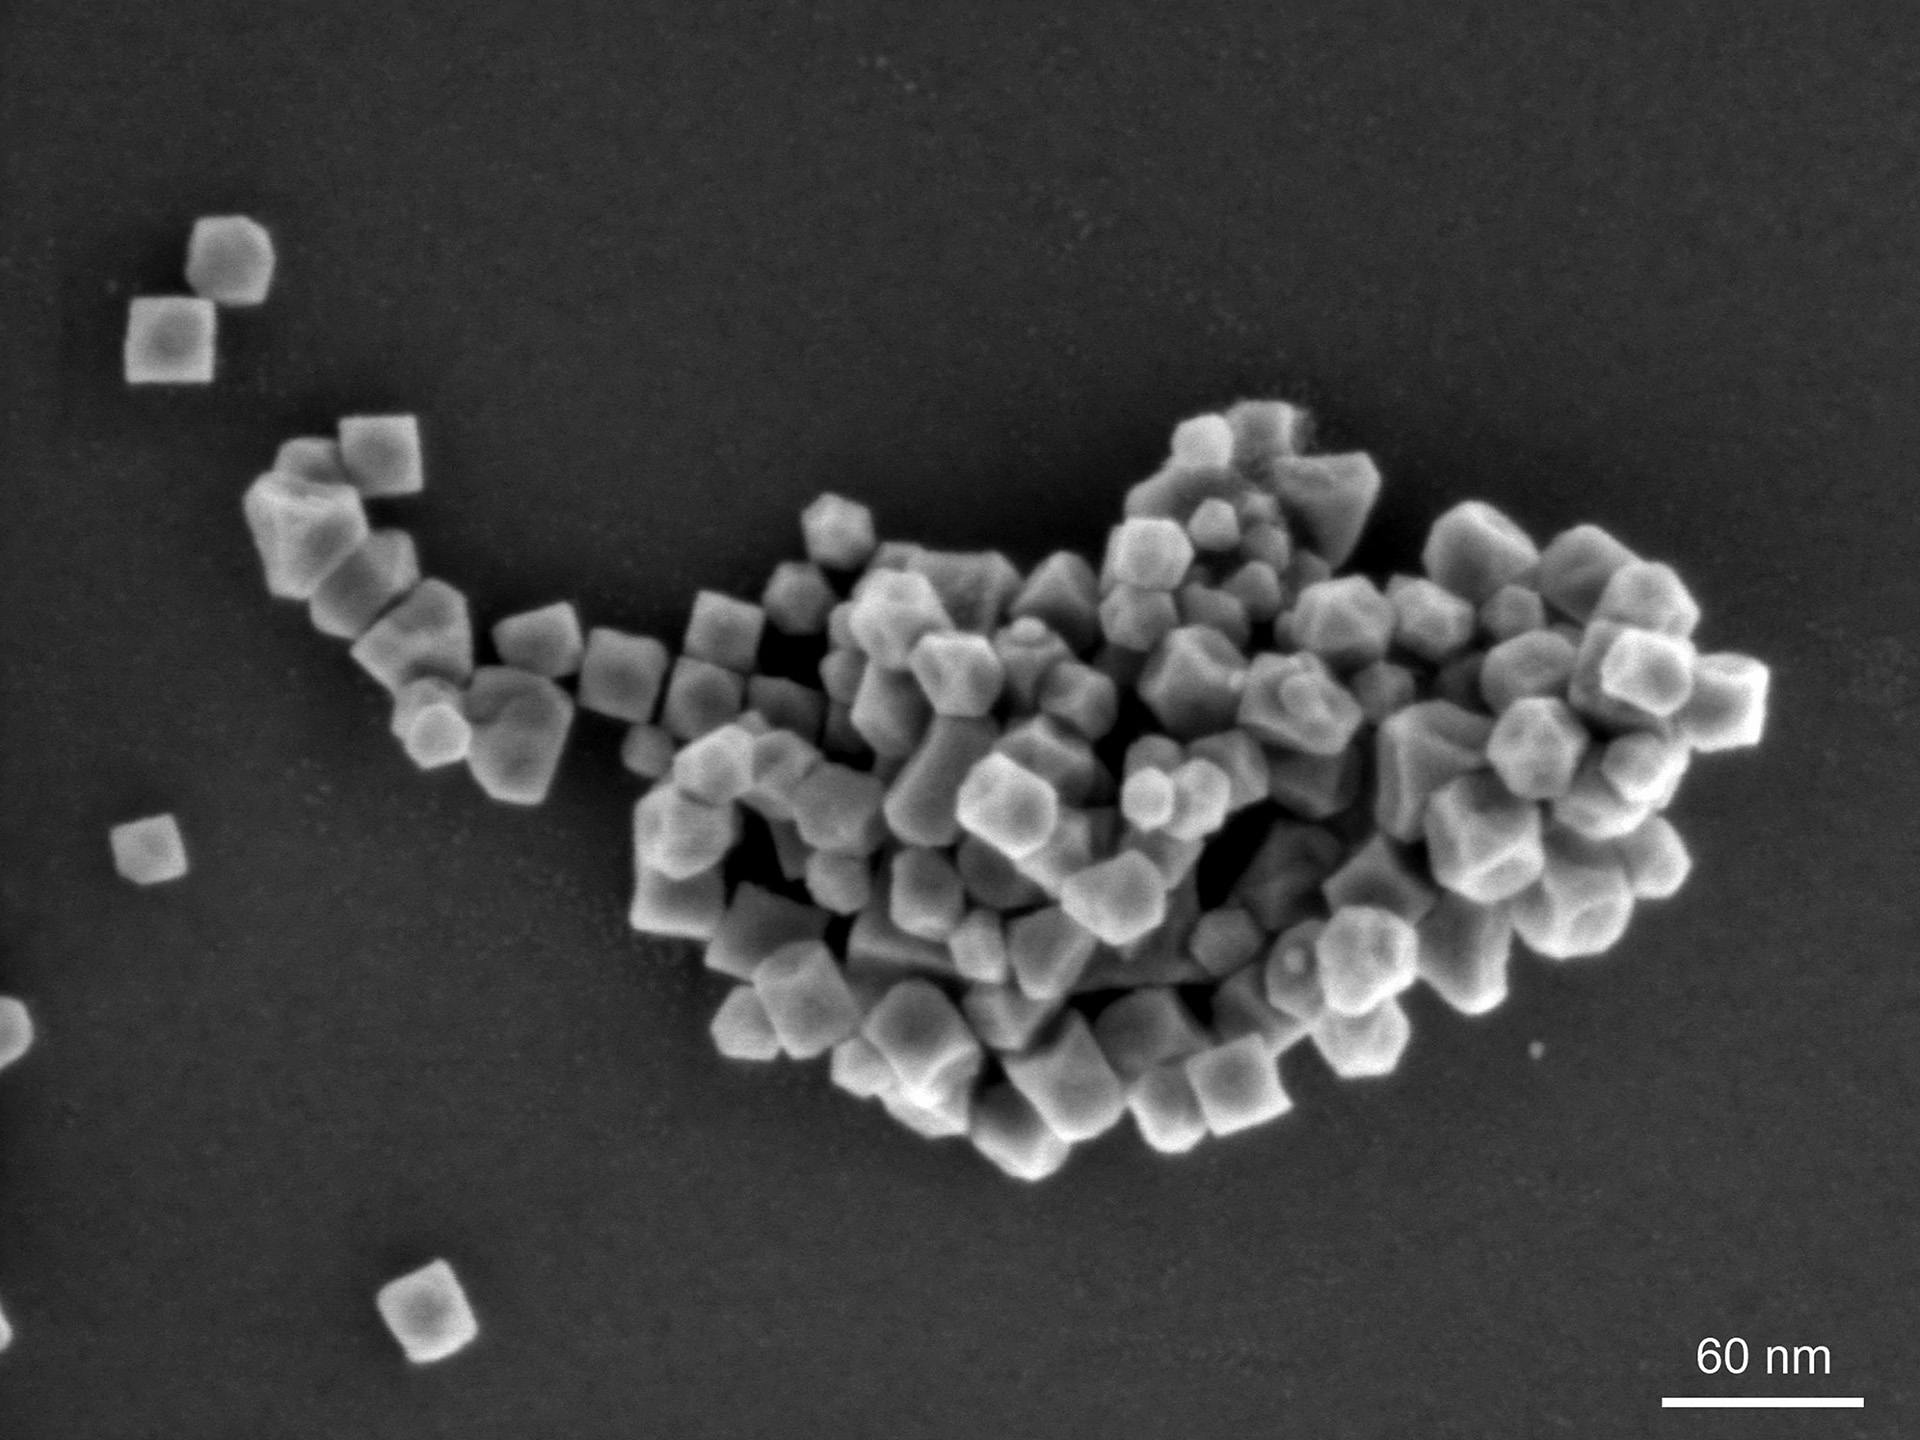 Magnetic, iron manganese nanoparticles where one cuboid particle has an edge length of approximately 25 nm, imaged at low acceleration voltage, ZEISS GeminiSEM 560, Inlens SE image, 1 kV, scale bar 50 nm.